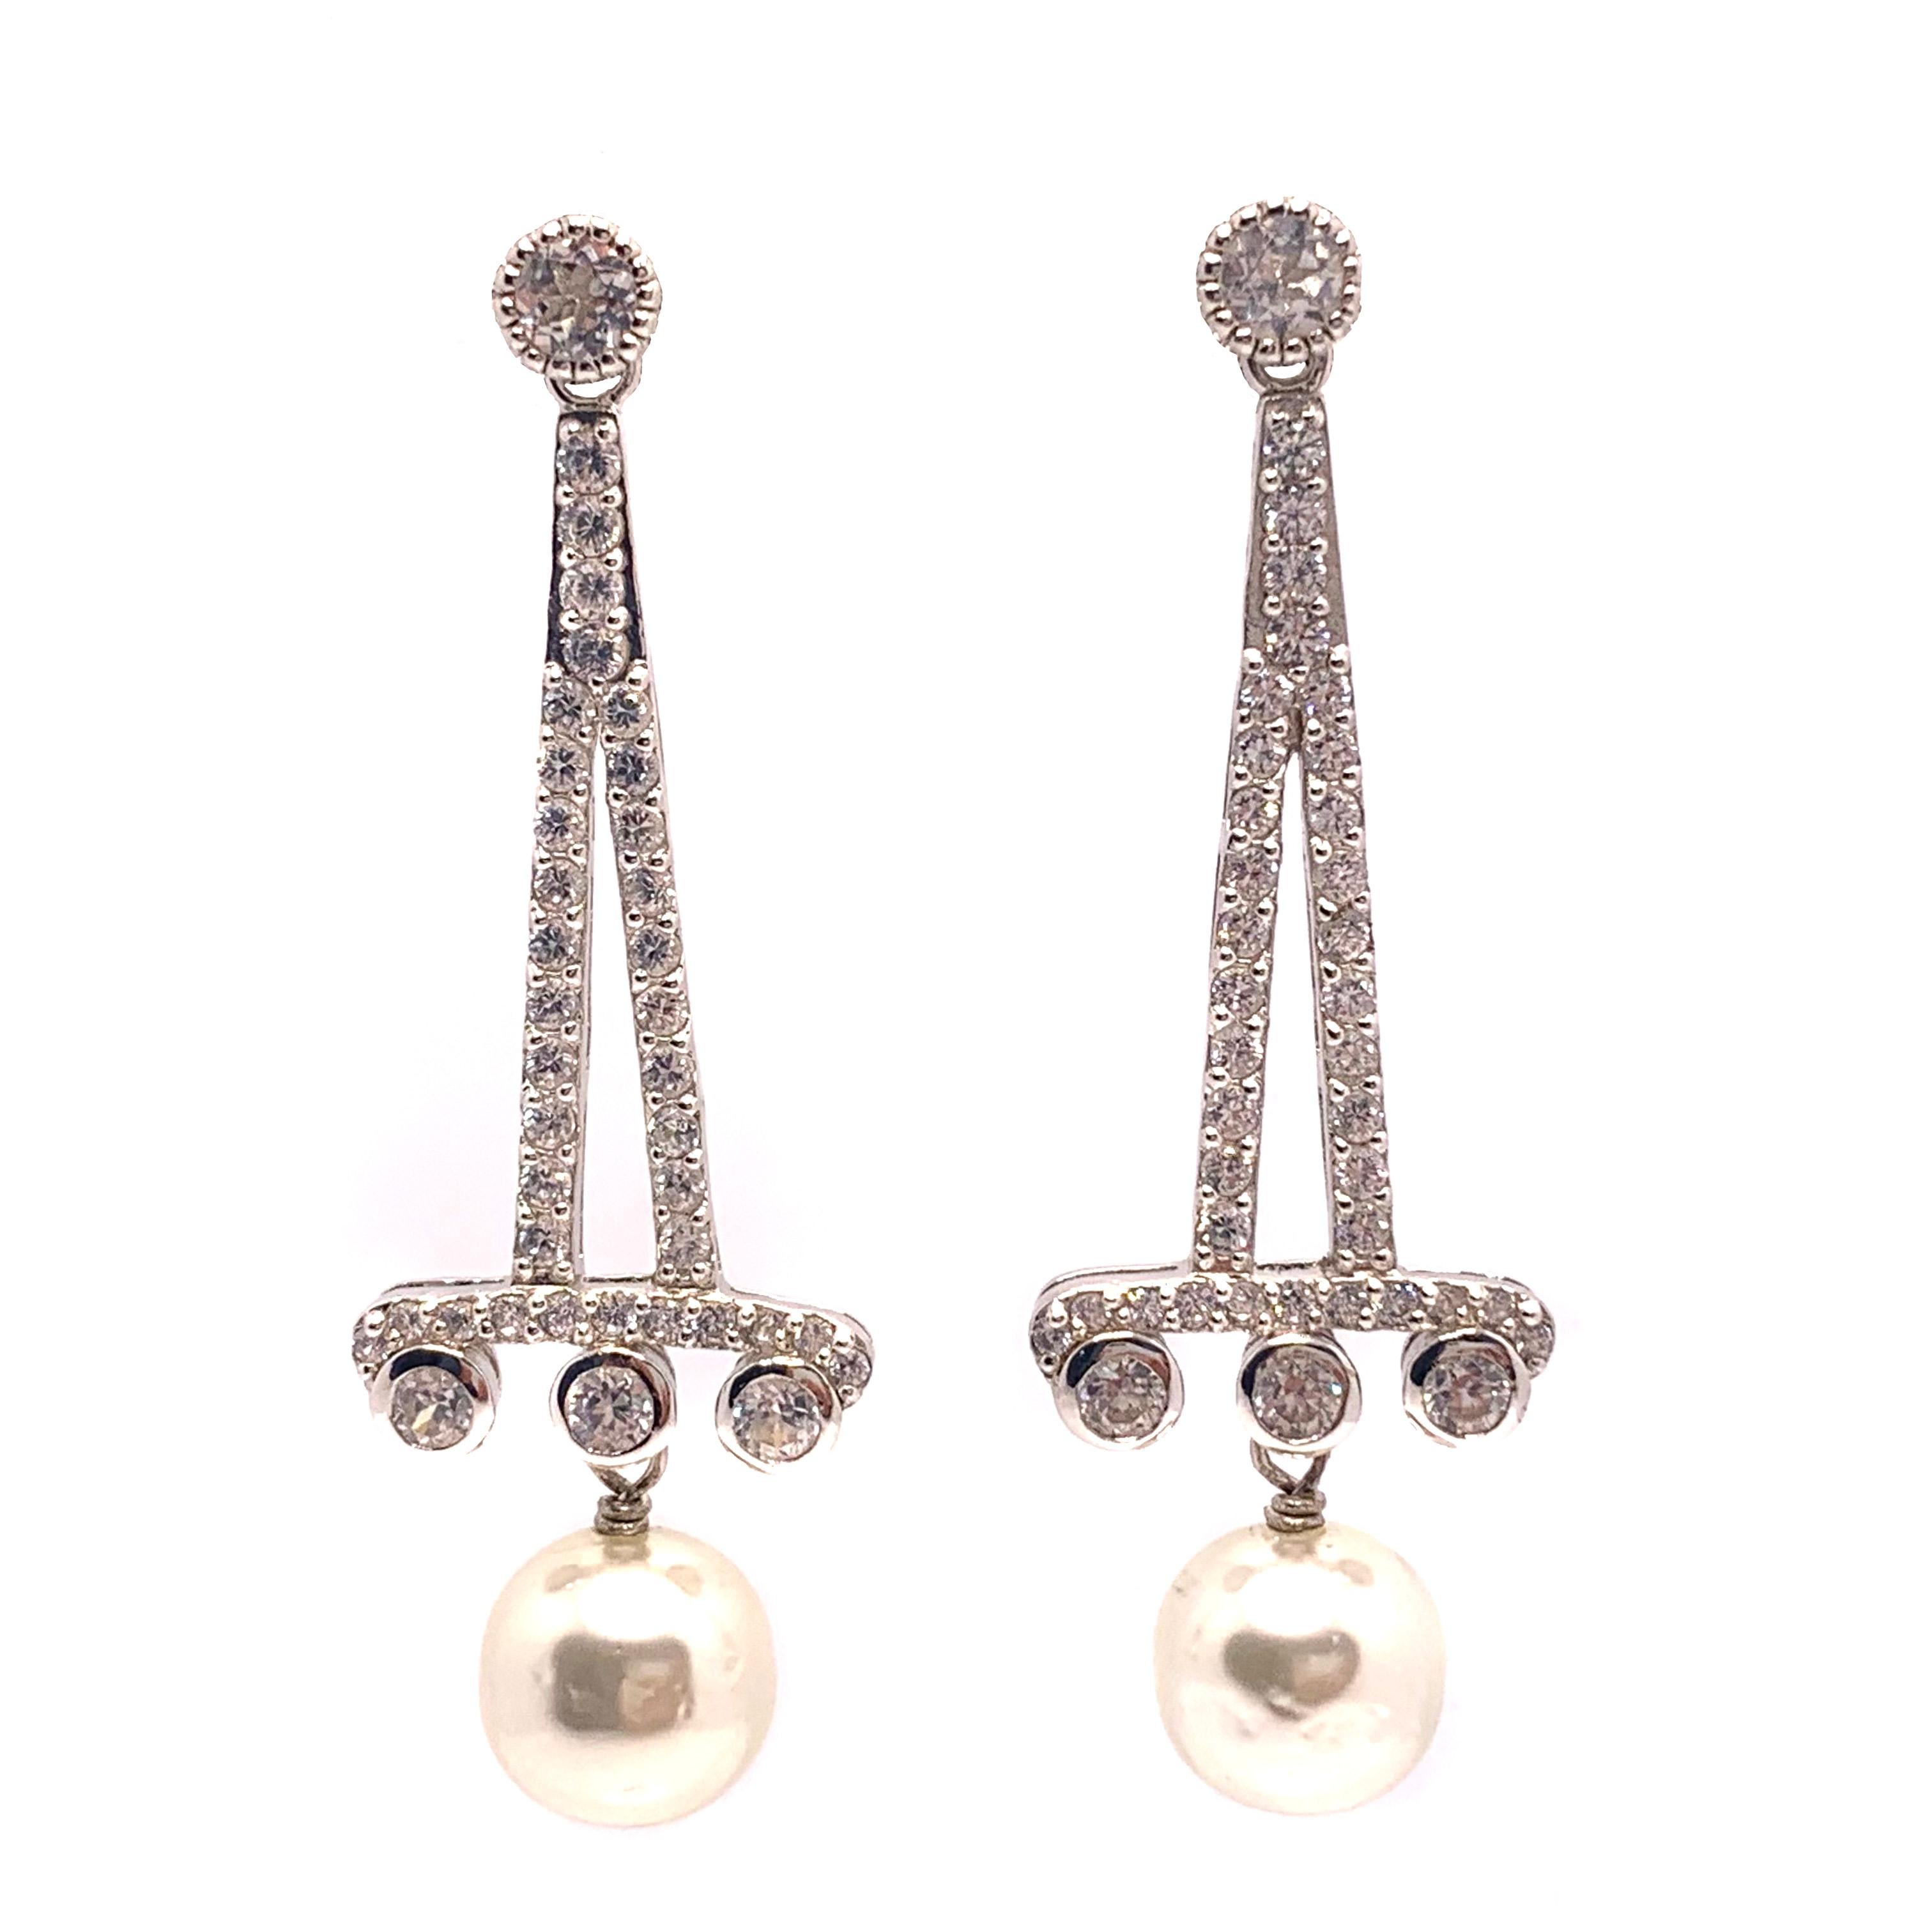 Stunning Art Deco Style with Glass Pearl Drop Earrings

These stunning Art Deco style earrings feature a pair of lustrous cultured baroque pearls and 80pcs of round simulated diamond, handset in platinum rhodium plated sterling silver with high